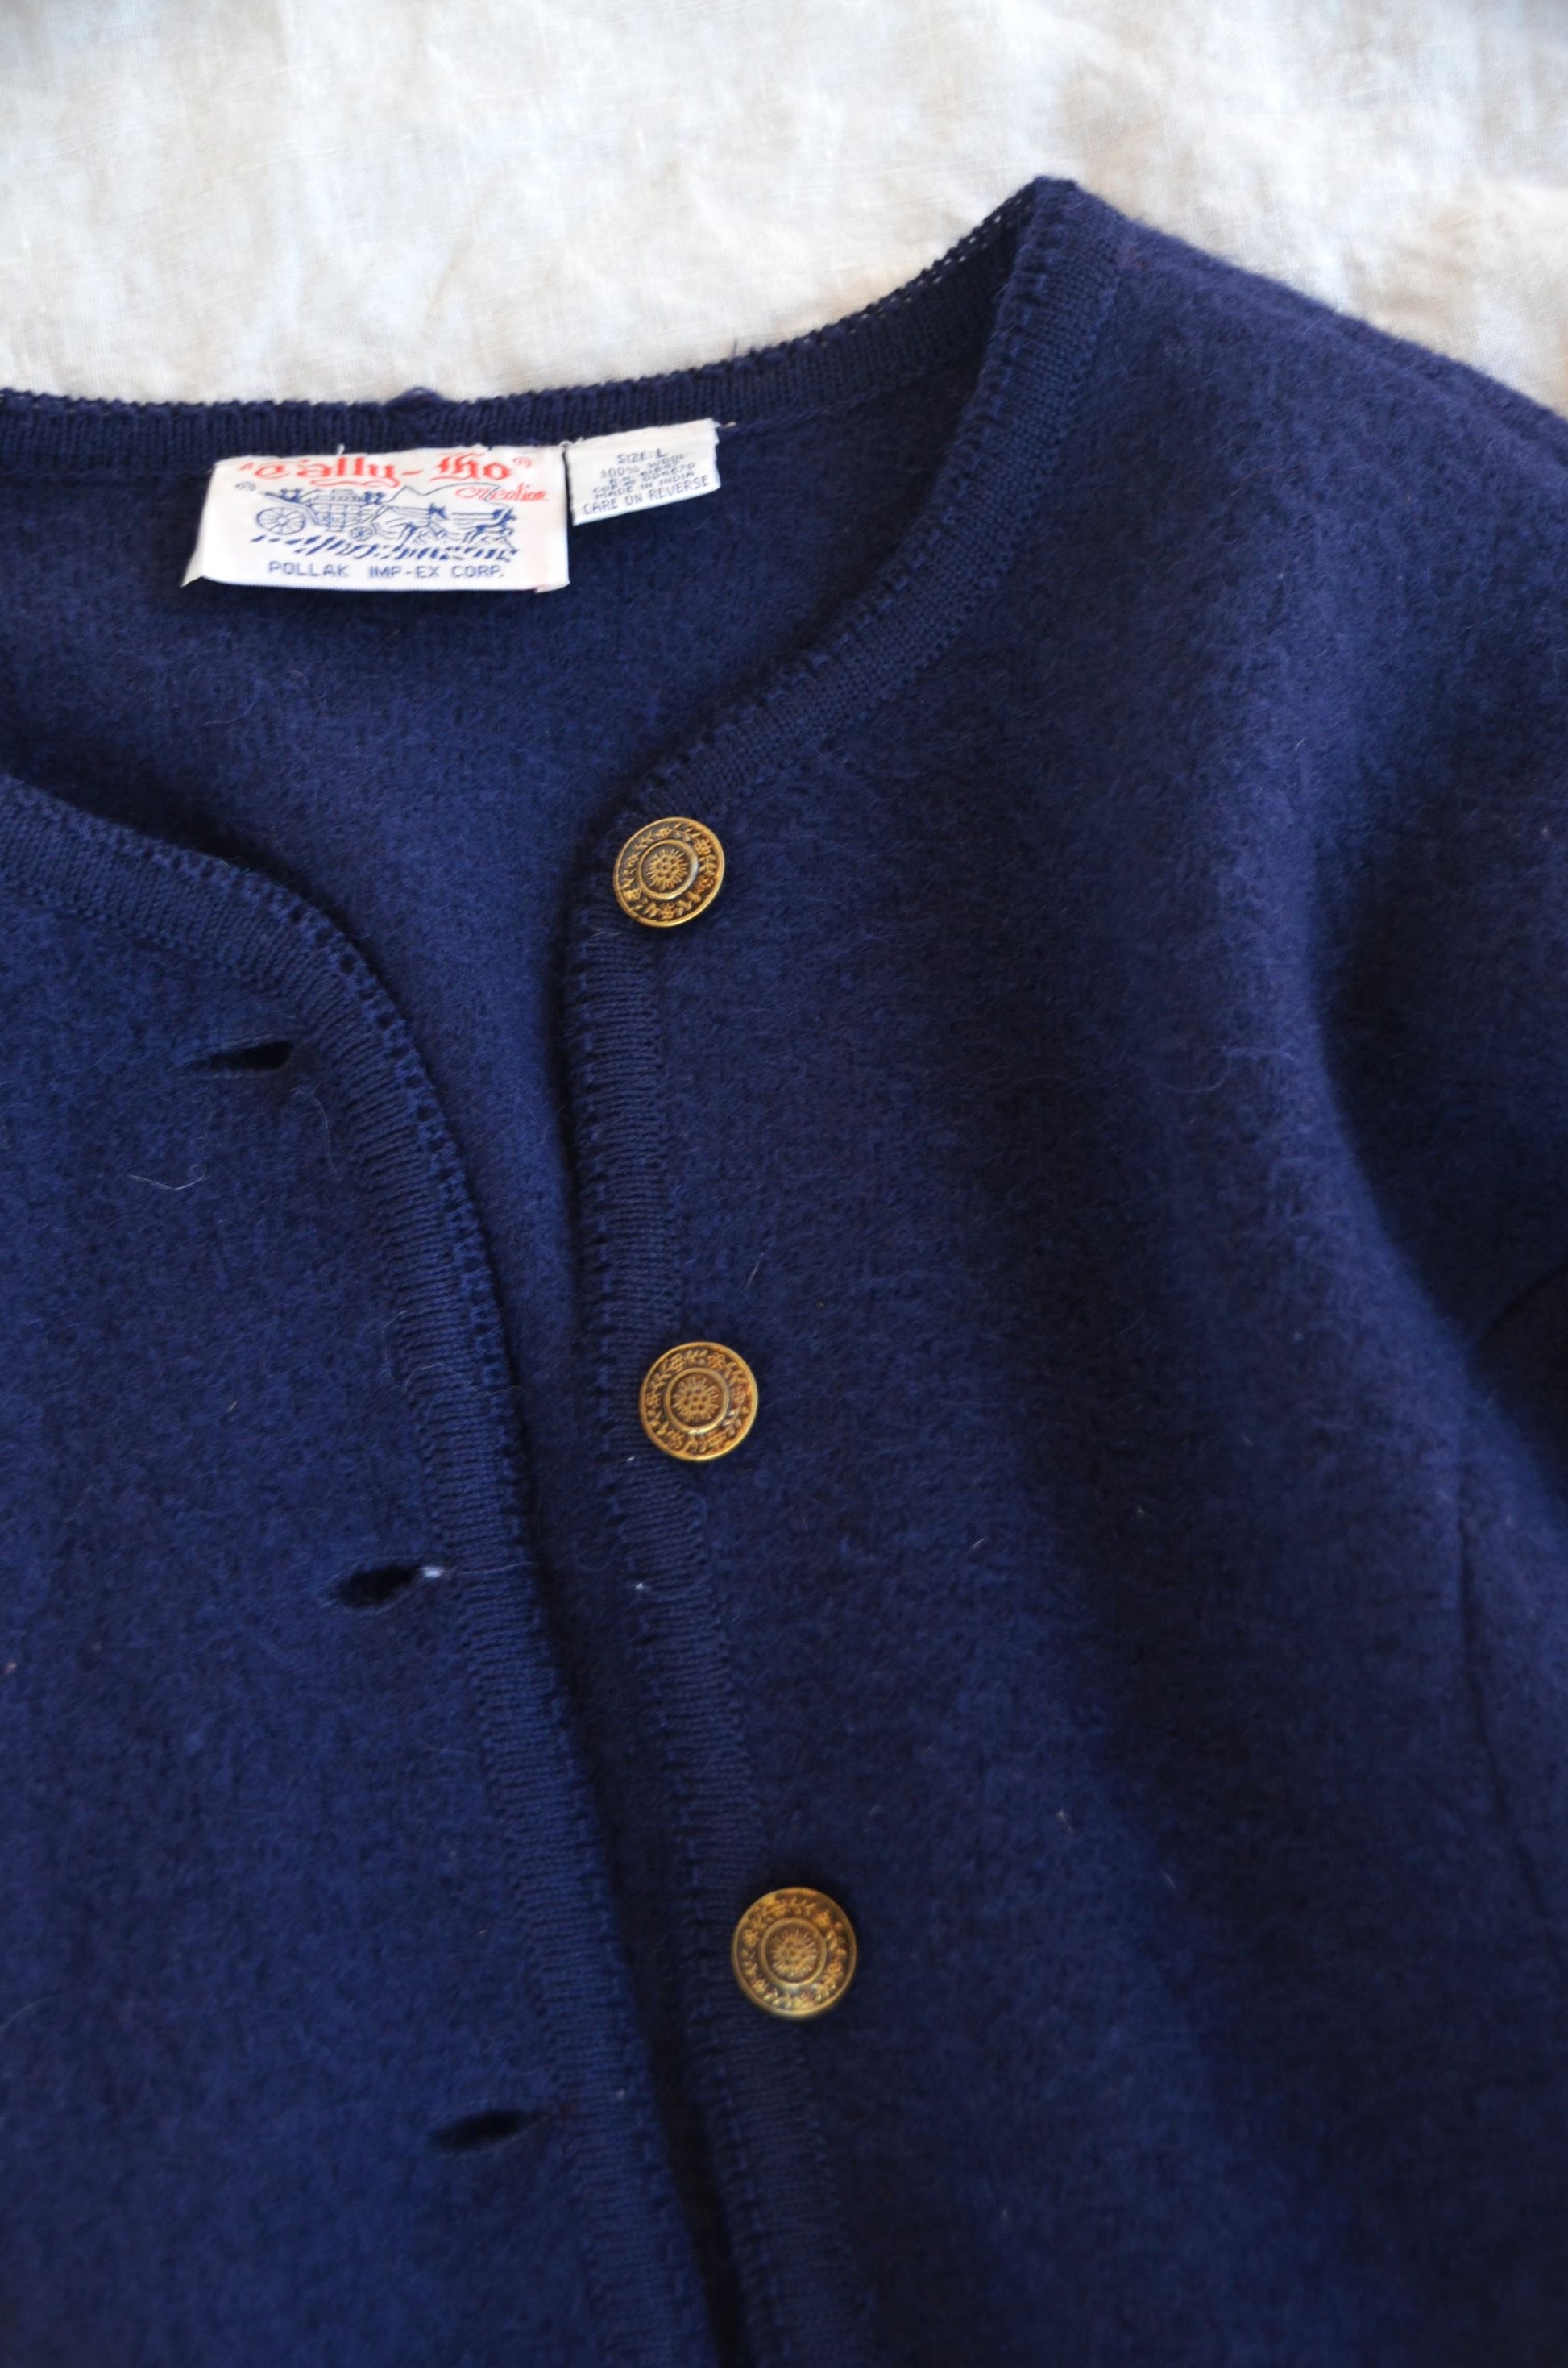 close up image of midnight blue wool coat or cardigan with floral button detail